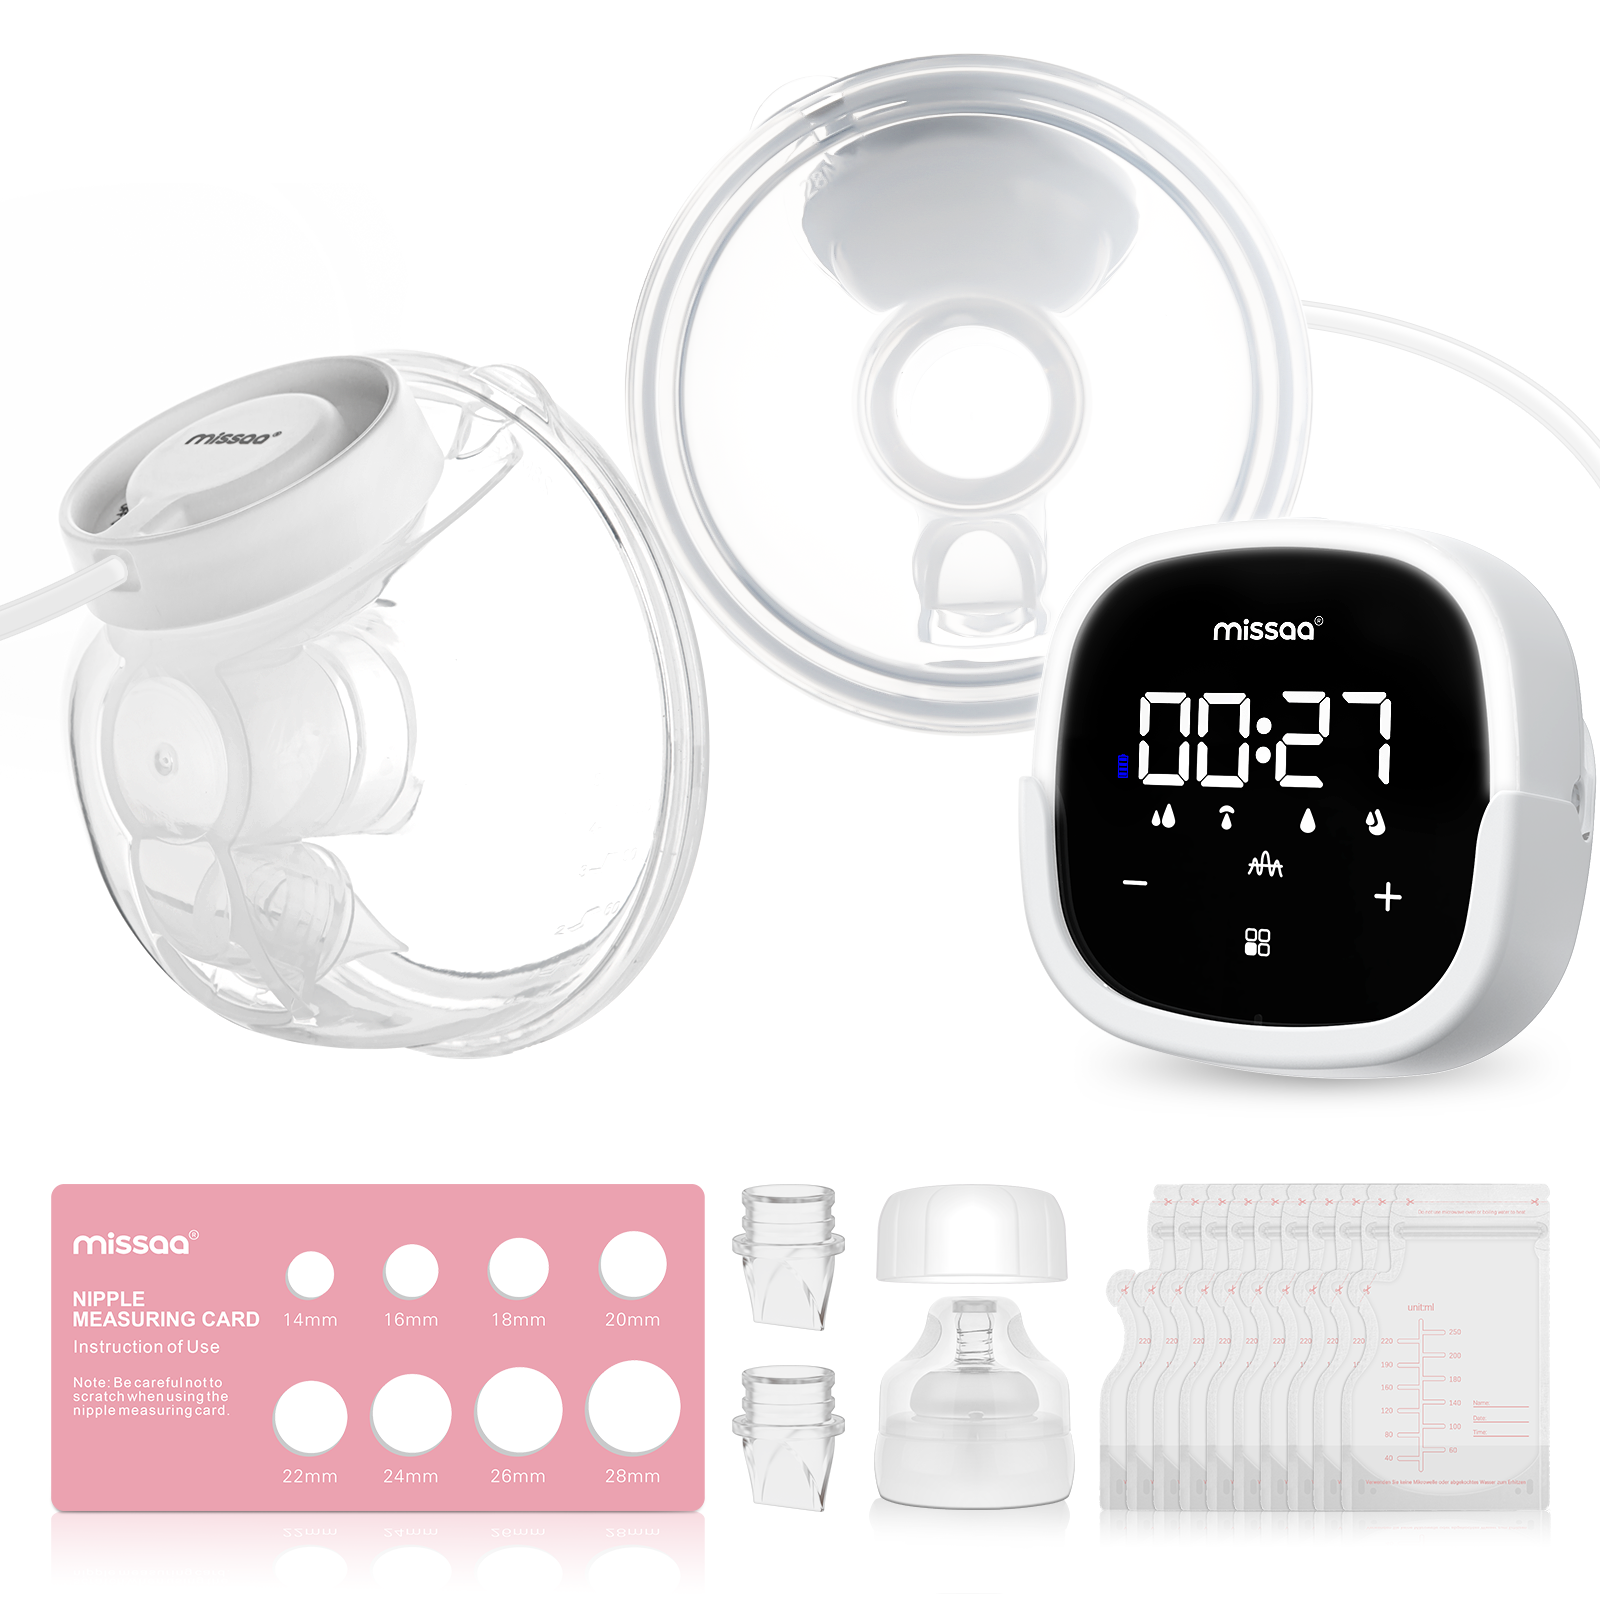 The S12: Hands-Free, Portable Breast Pump for Busy Moms